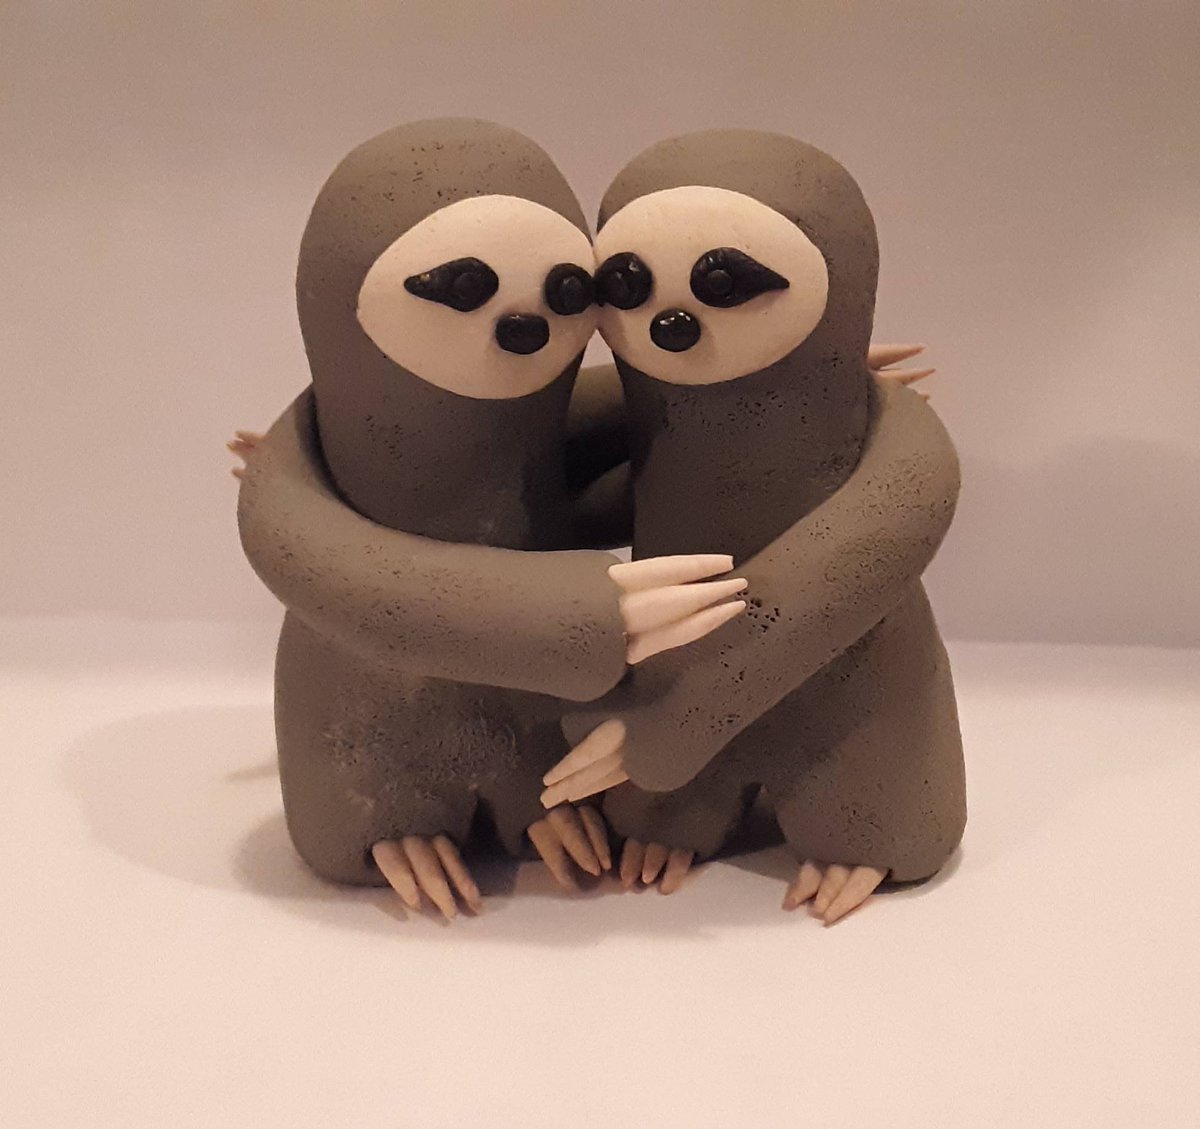 Excited to share the latest addition to my #etsy shop: Sloth Love Wedding Cake Topper &lt;3 This adorable couple is 100% handmade with love <3 #weddings #decoration #slothcaketopper #weddingkeepsake #cute #animalsinlove #partyfavors #specialoccassions etsy.me/2VgTNUA